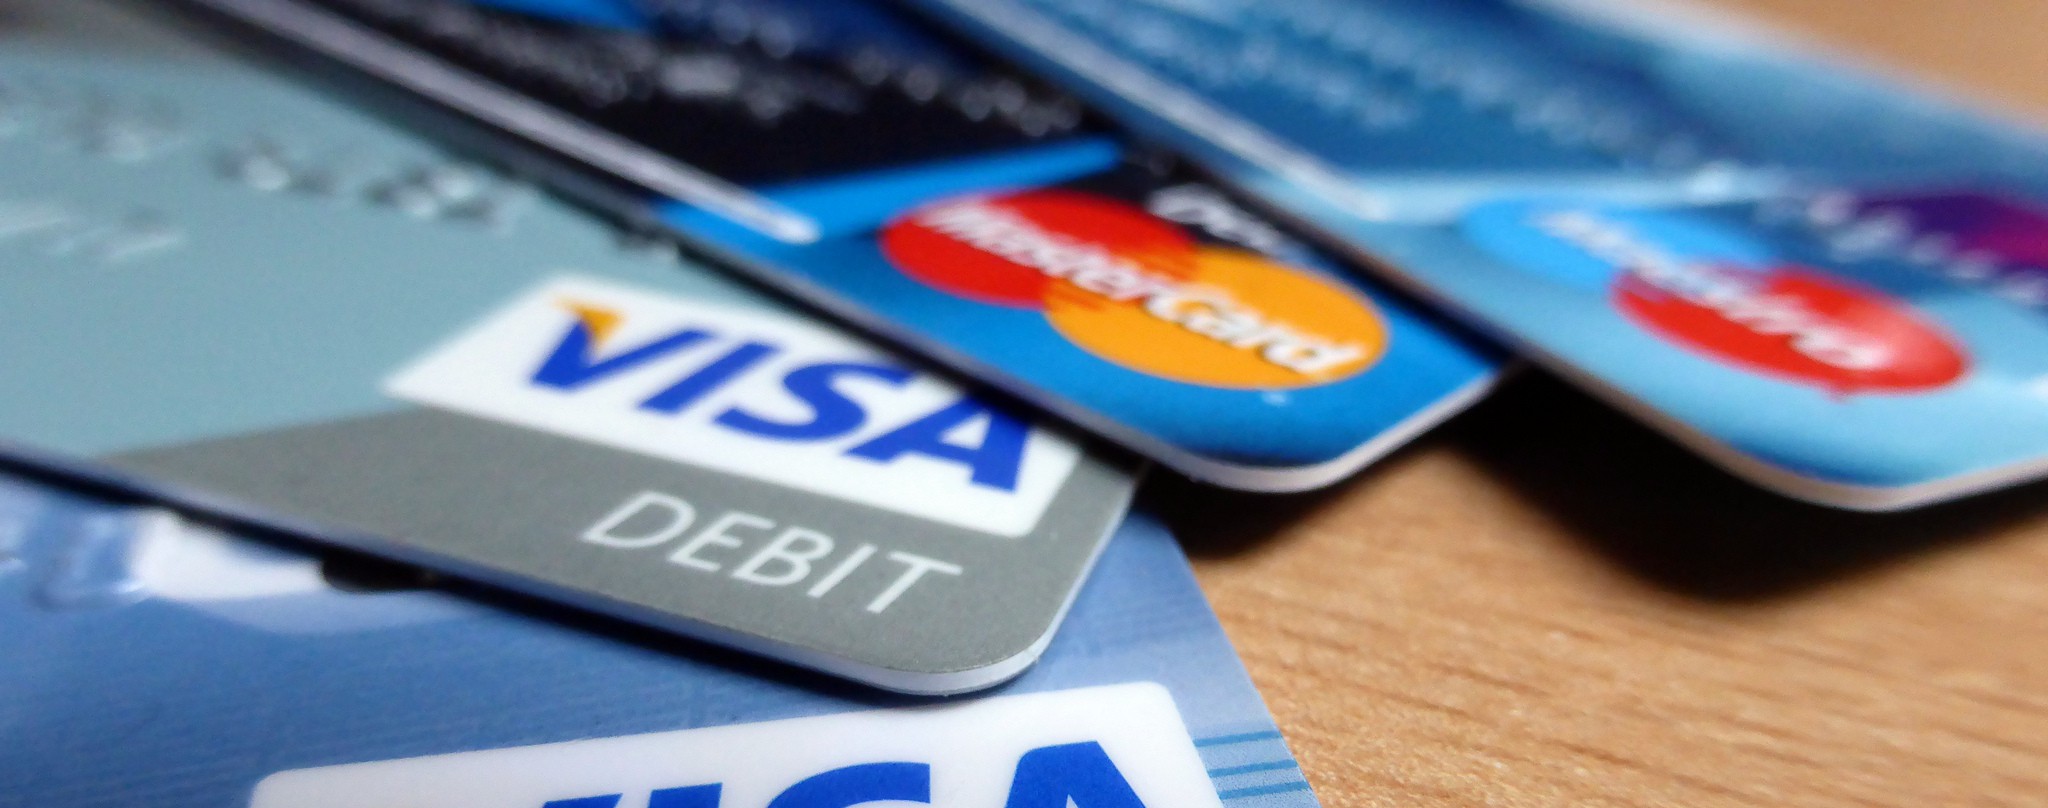 American Express Purchase Protection Explained - Mile Writer